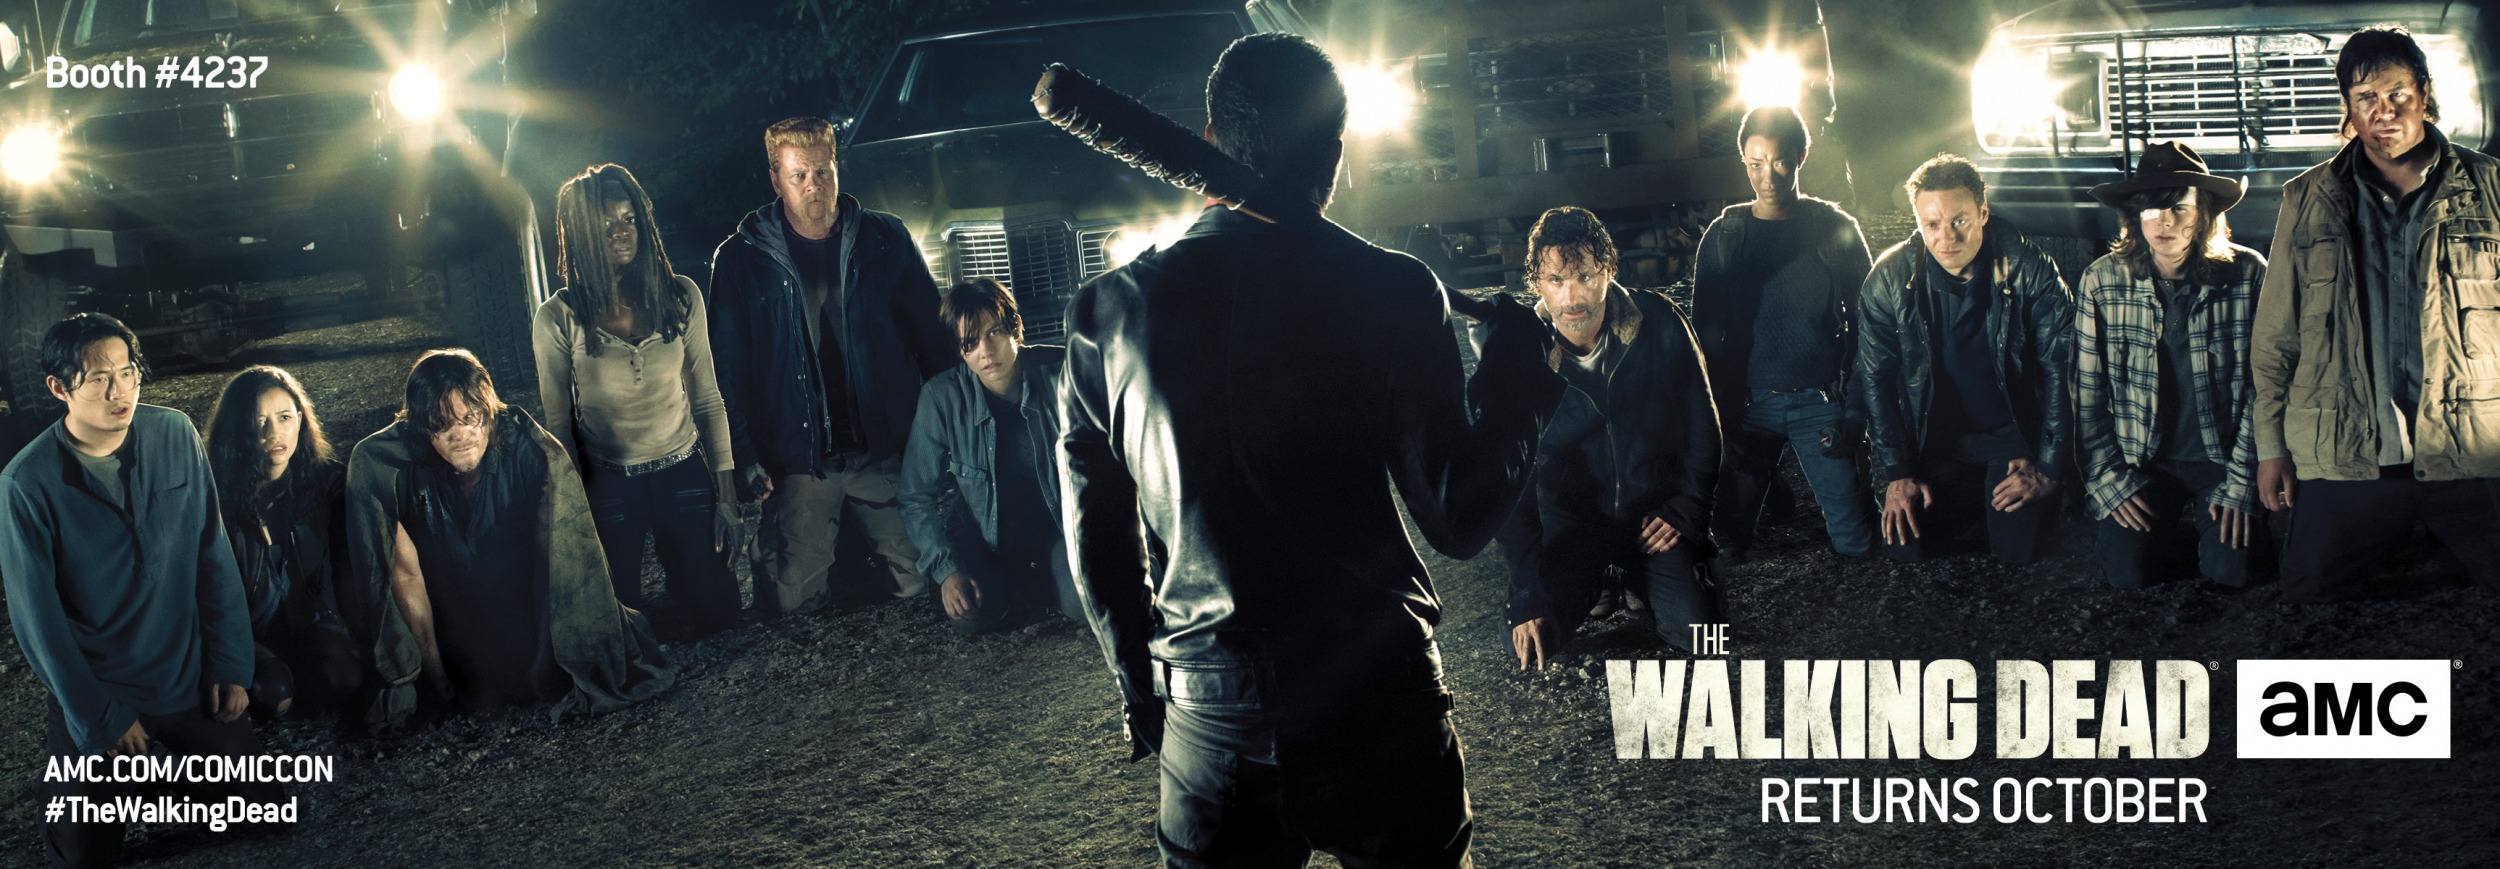 Mega Sized TV Poster Image for The Walking Dead (#46 of 67)